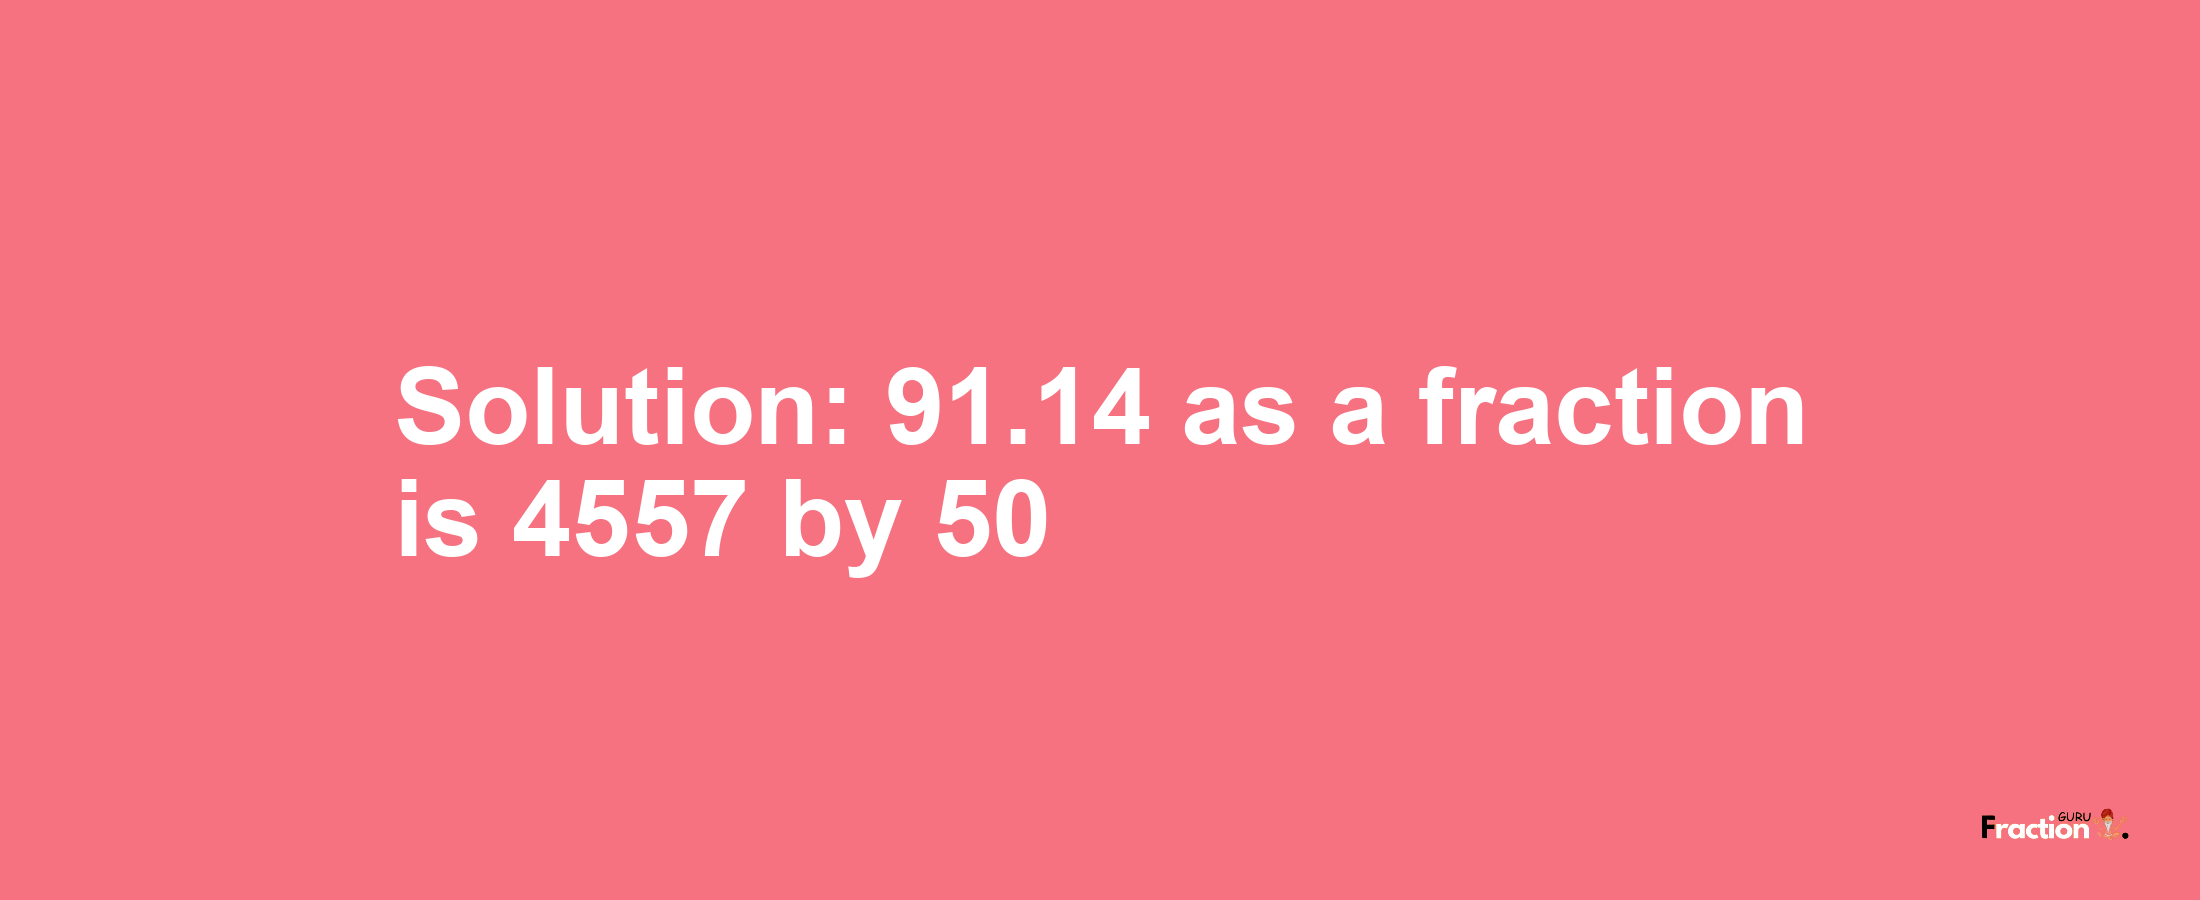 Solution:91.14 as a fraction is 4557/50